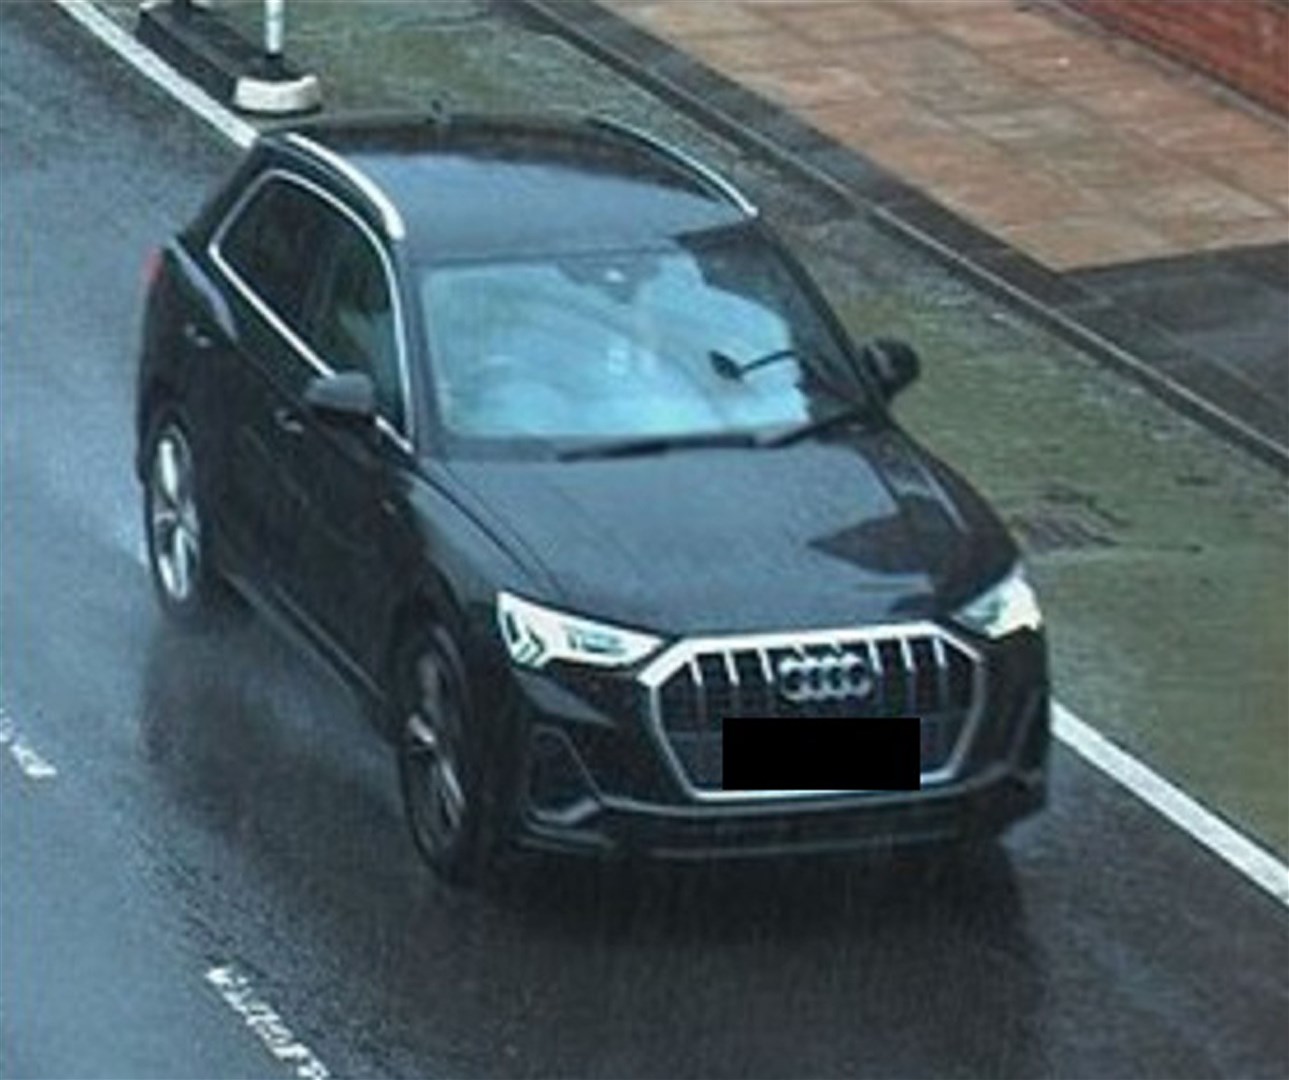 An Audi Q3 which police said forms part of the investigation (Merseyside Police/PA)